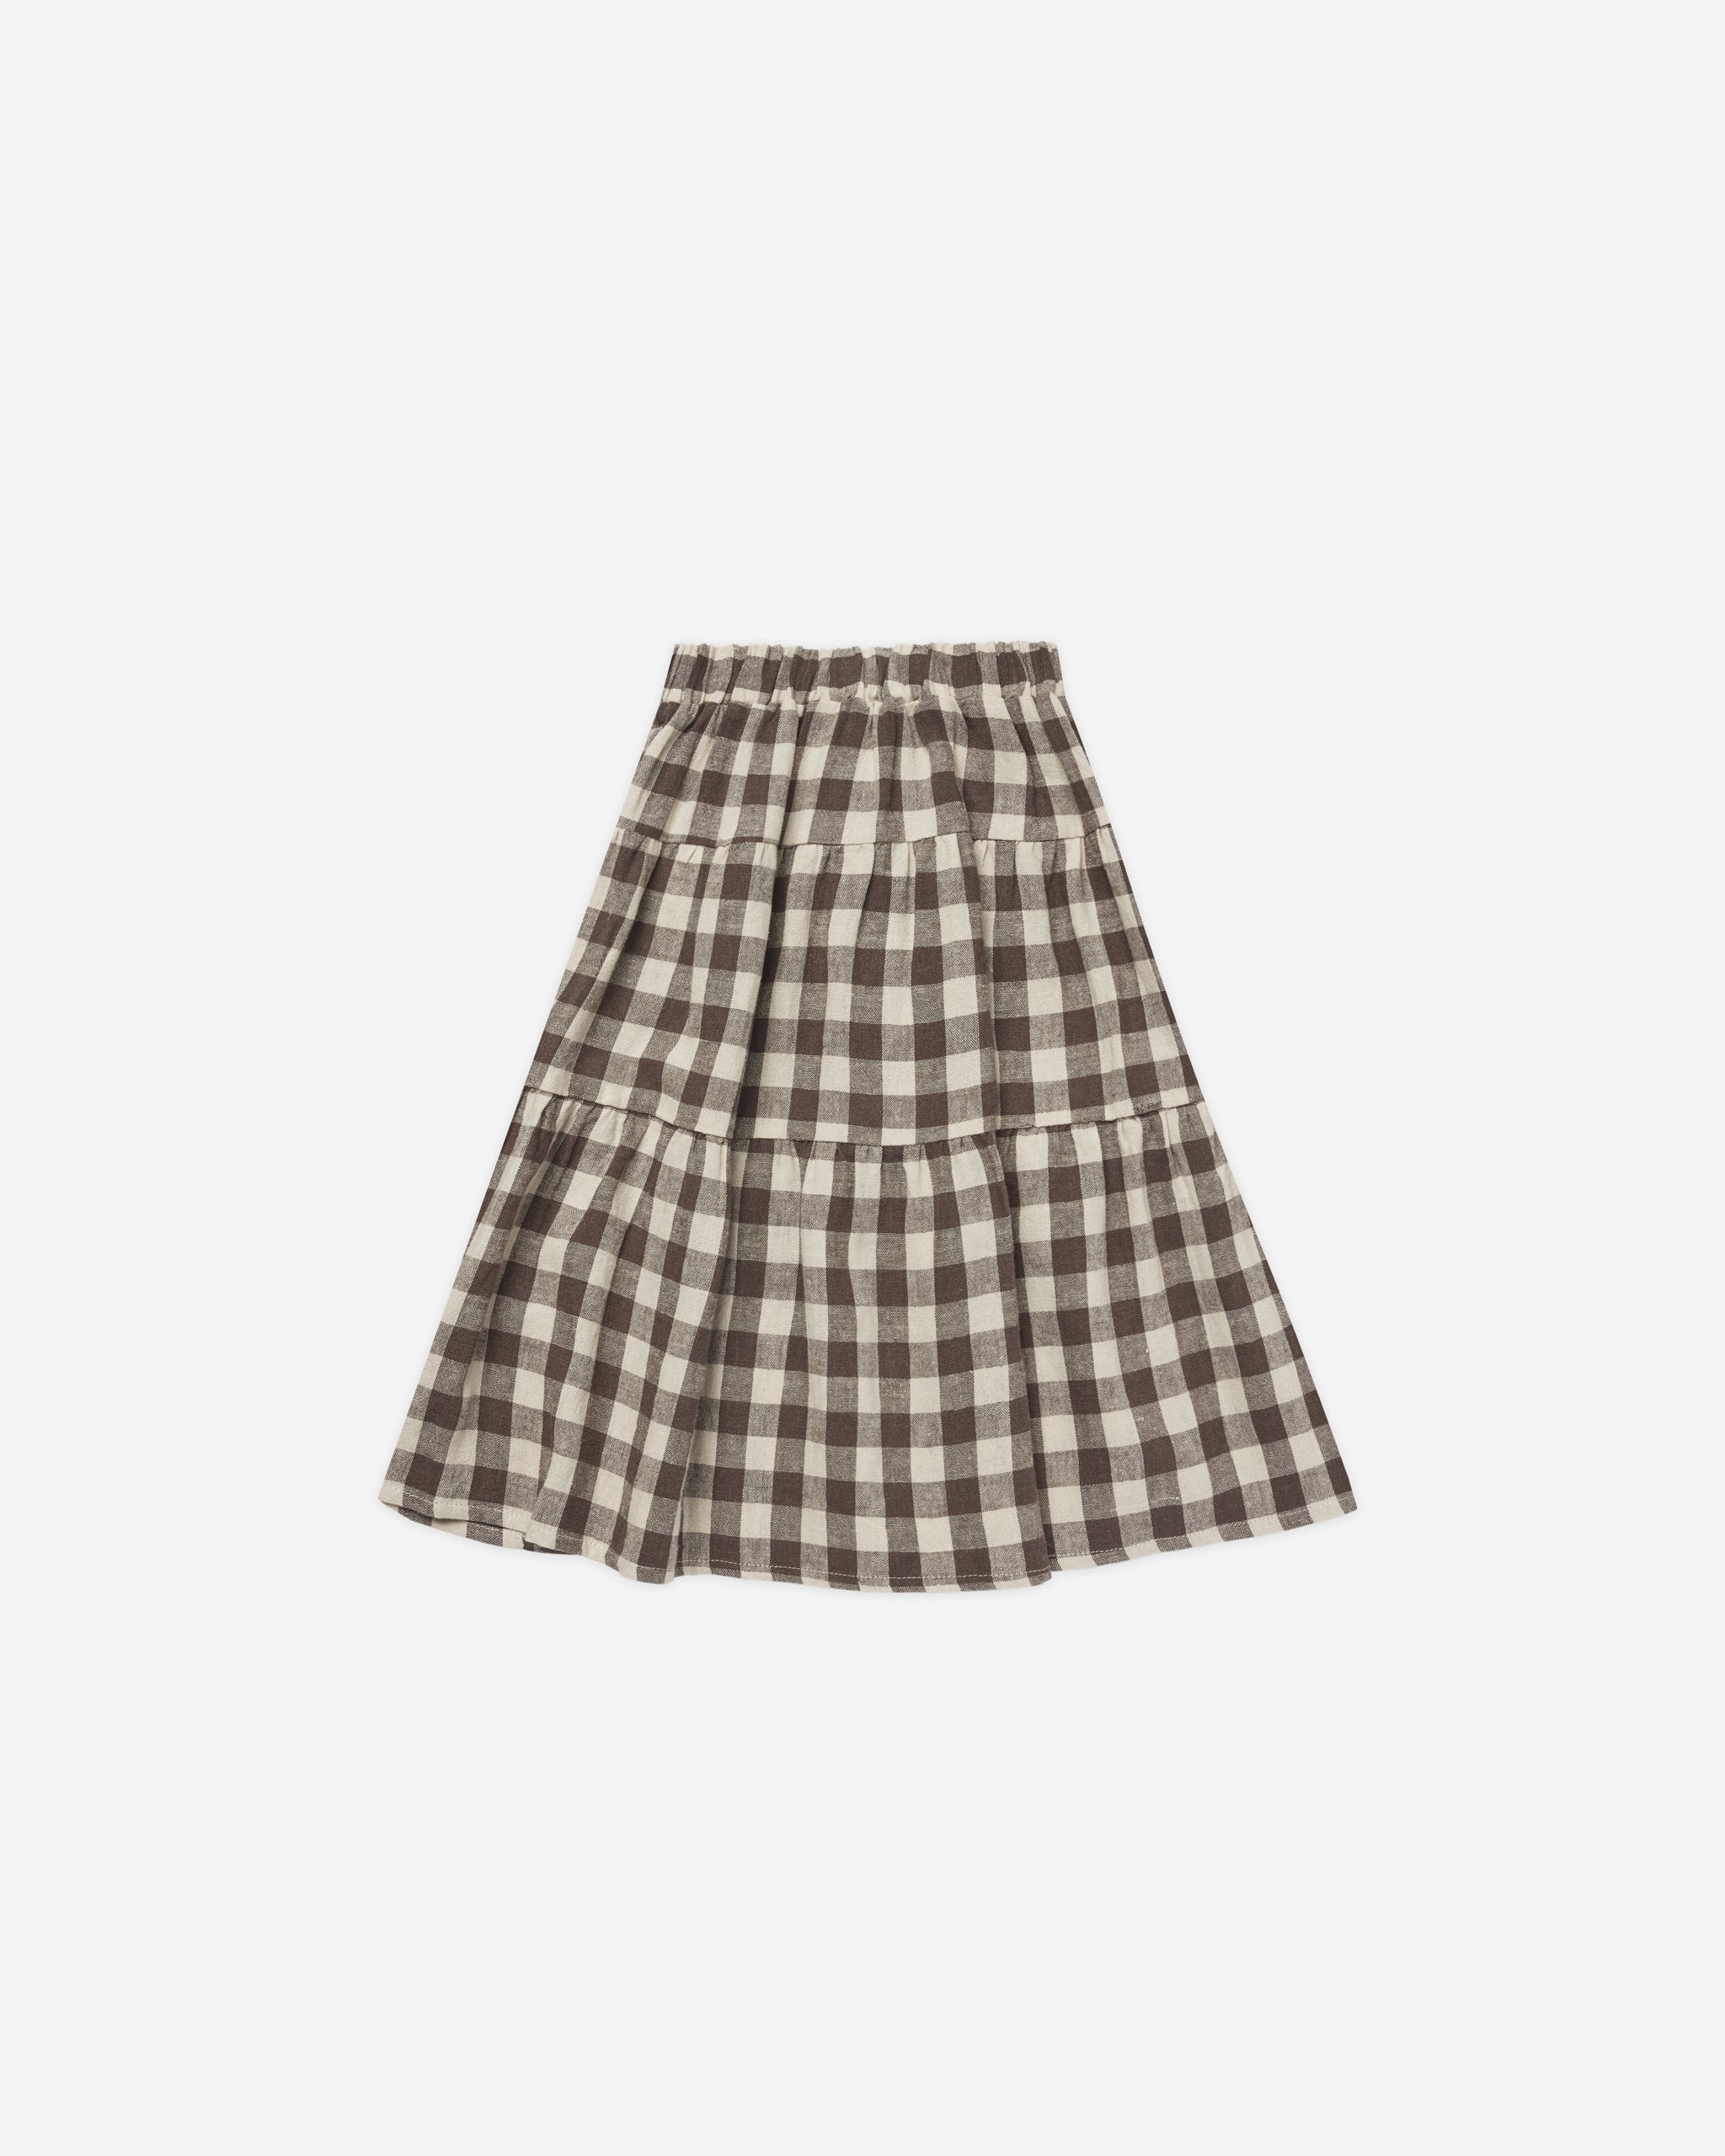 Tiered Midi Skirt || Charcoal Check - Rylee + Cru | Kids Clothes | Trendy Baby Clothes | Modern Infant Outfits |